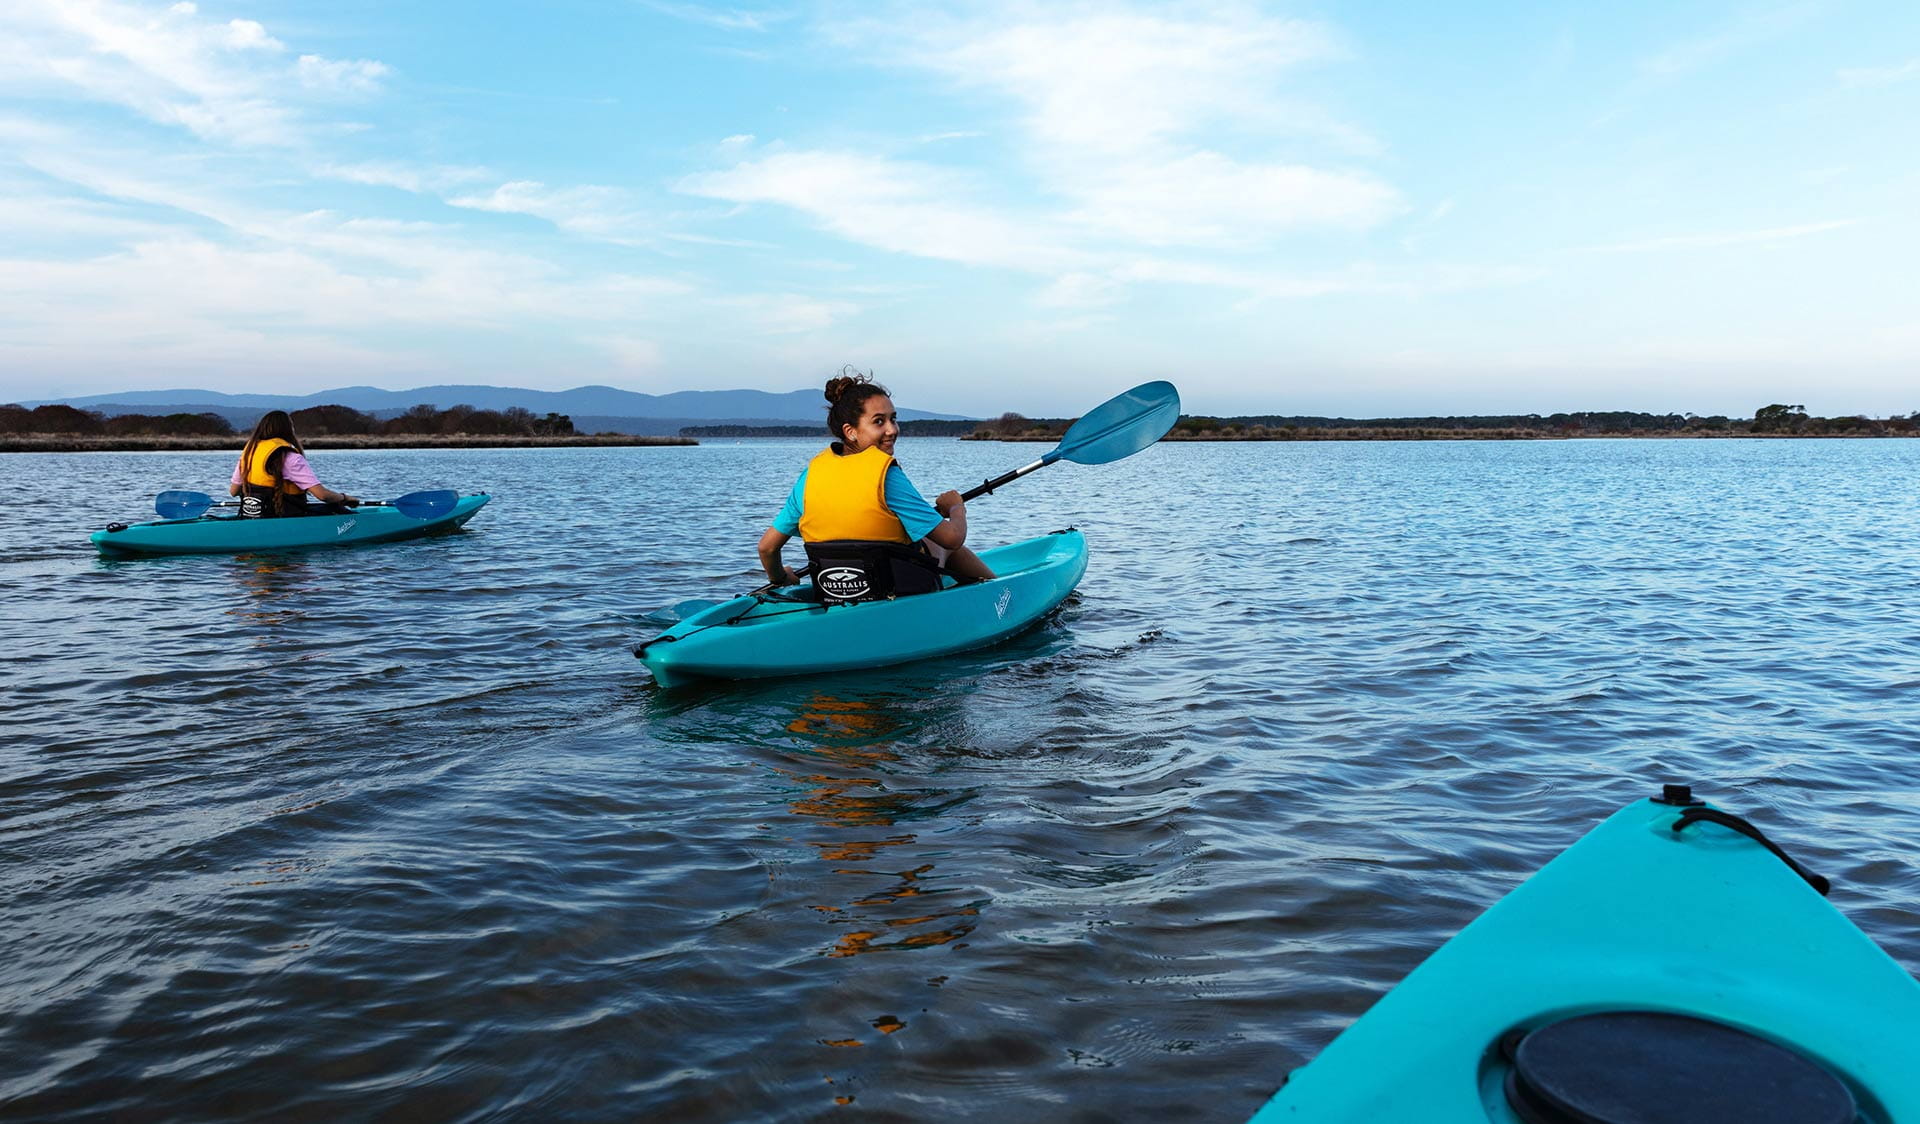 Two teenage girls kayaking on Mallacoota Inlet with mountains in the background.